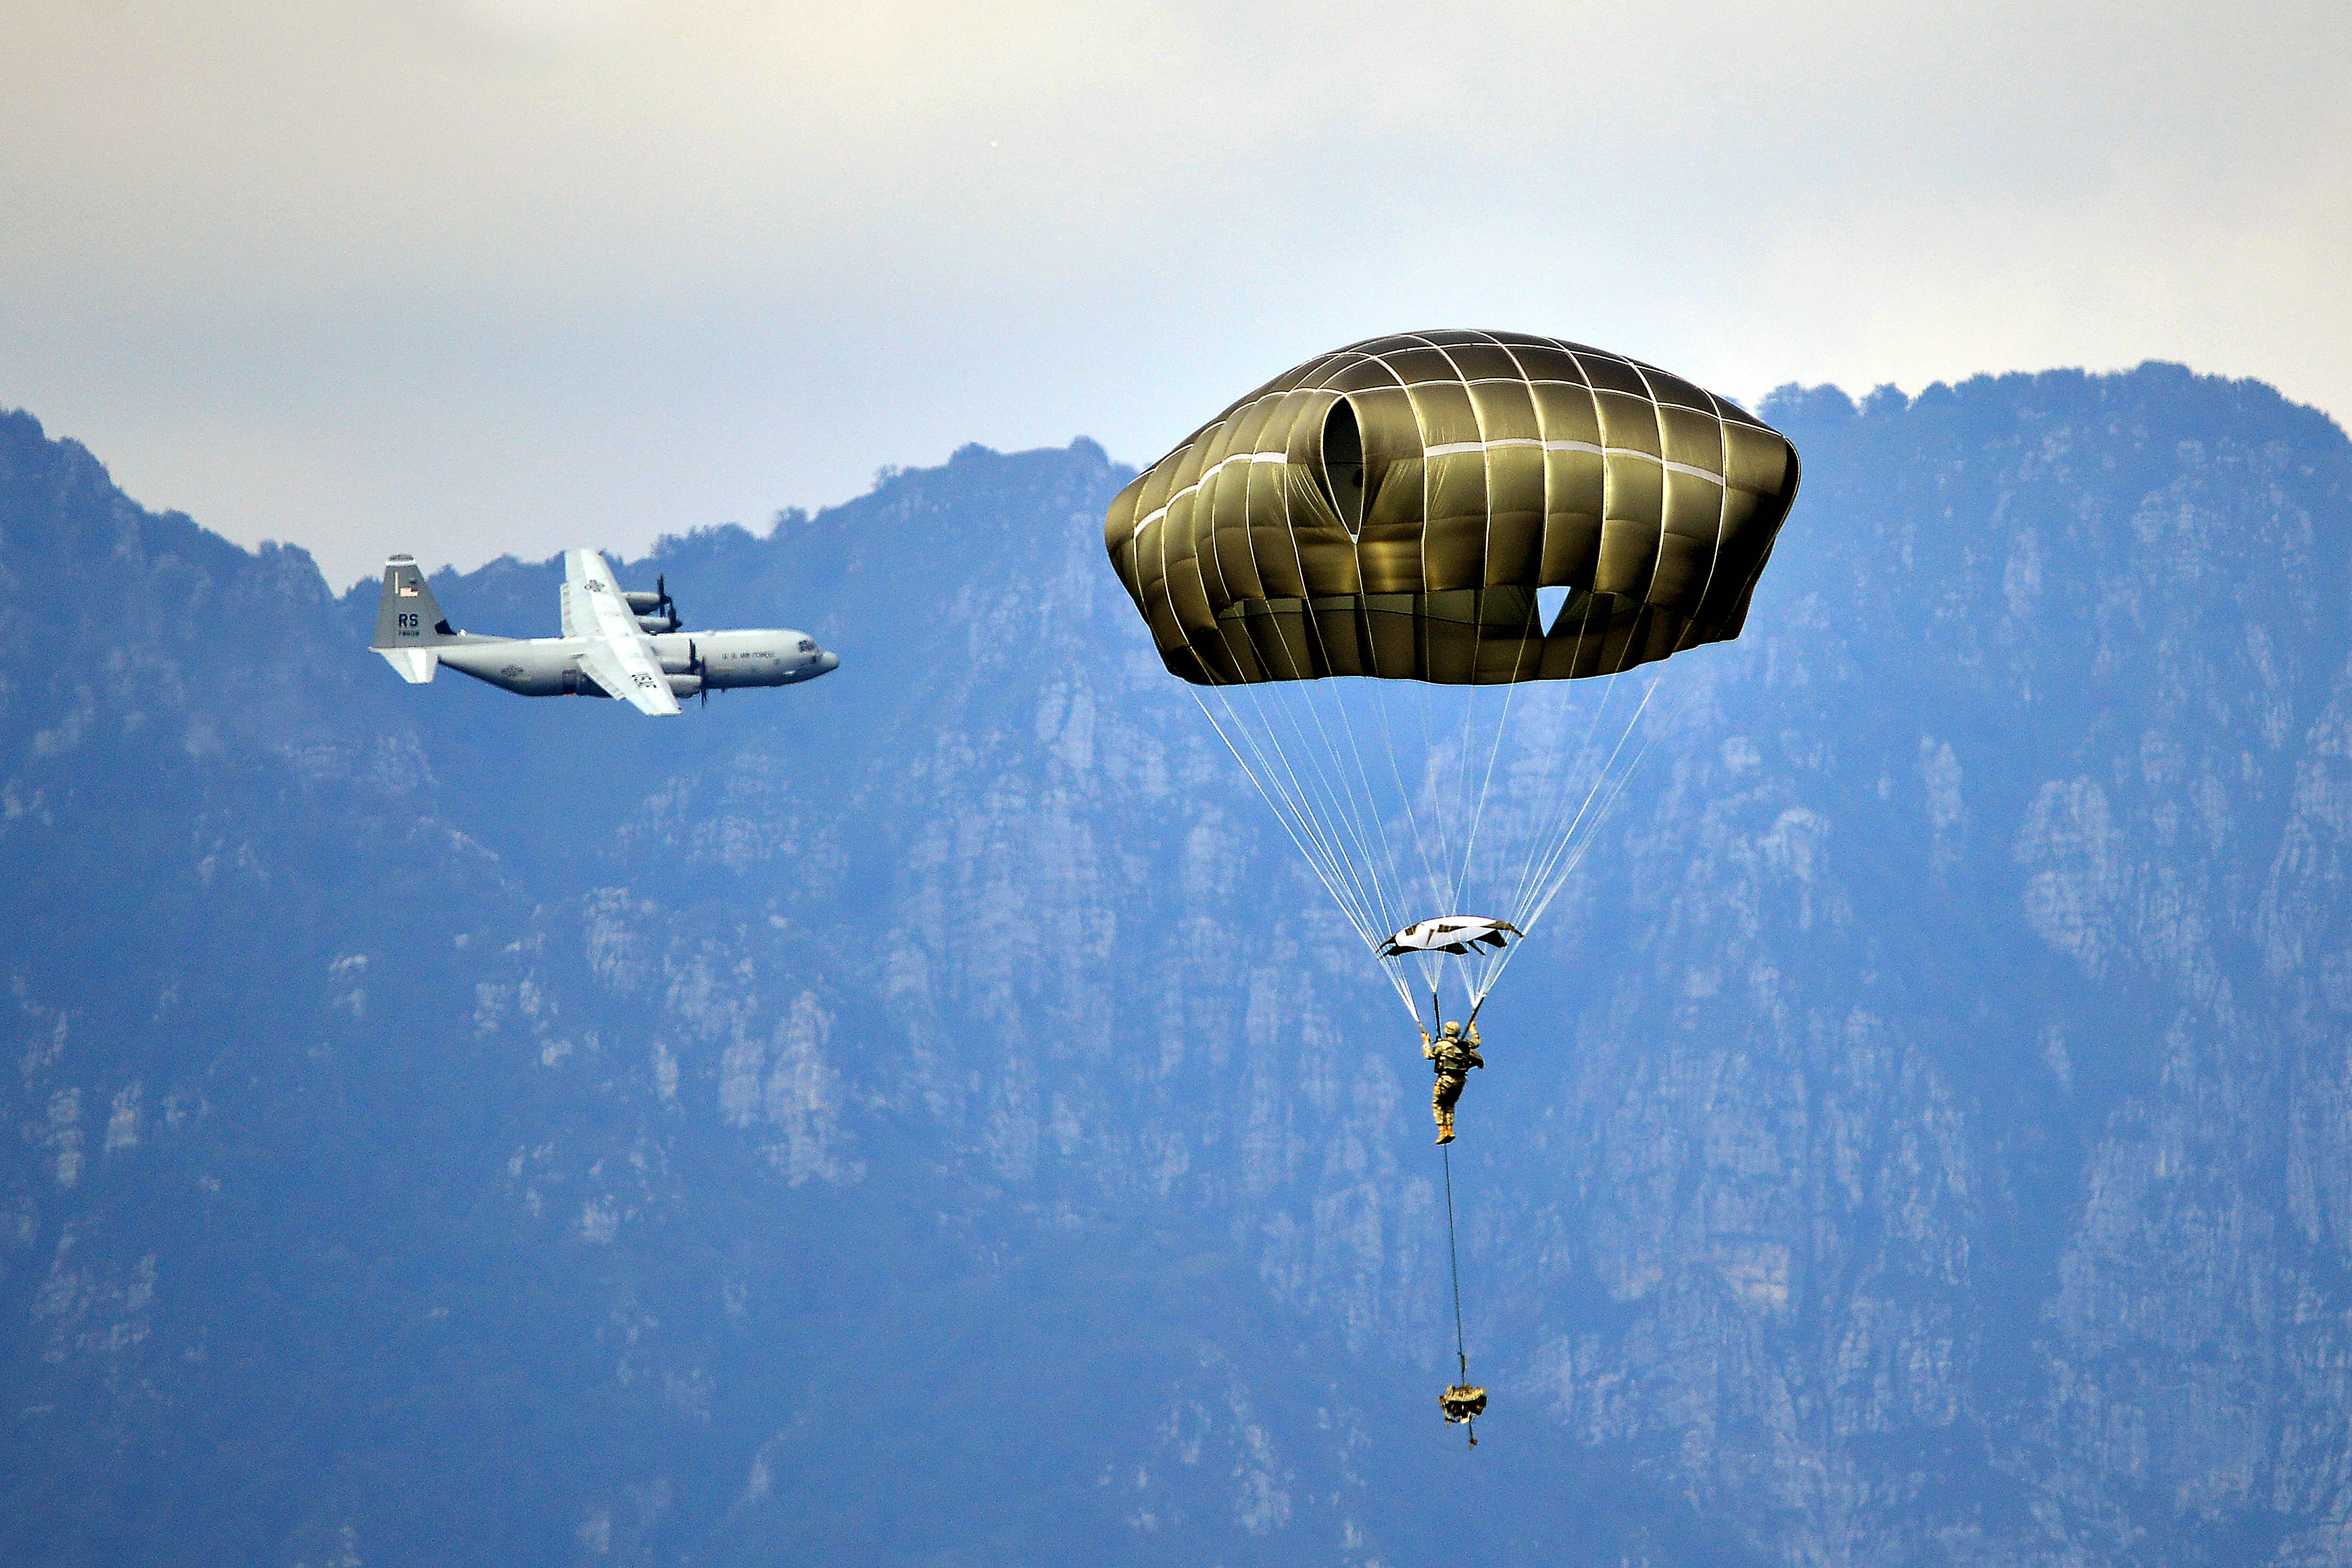 A C-130 Hercules aircraft departs while a U.S. paratrooper descends onto  the Juliet Drop Zone